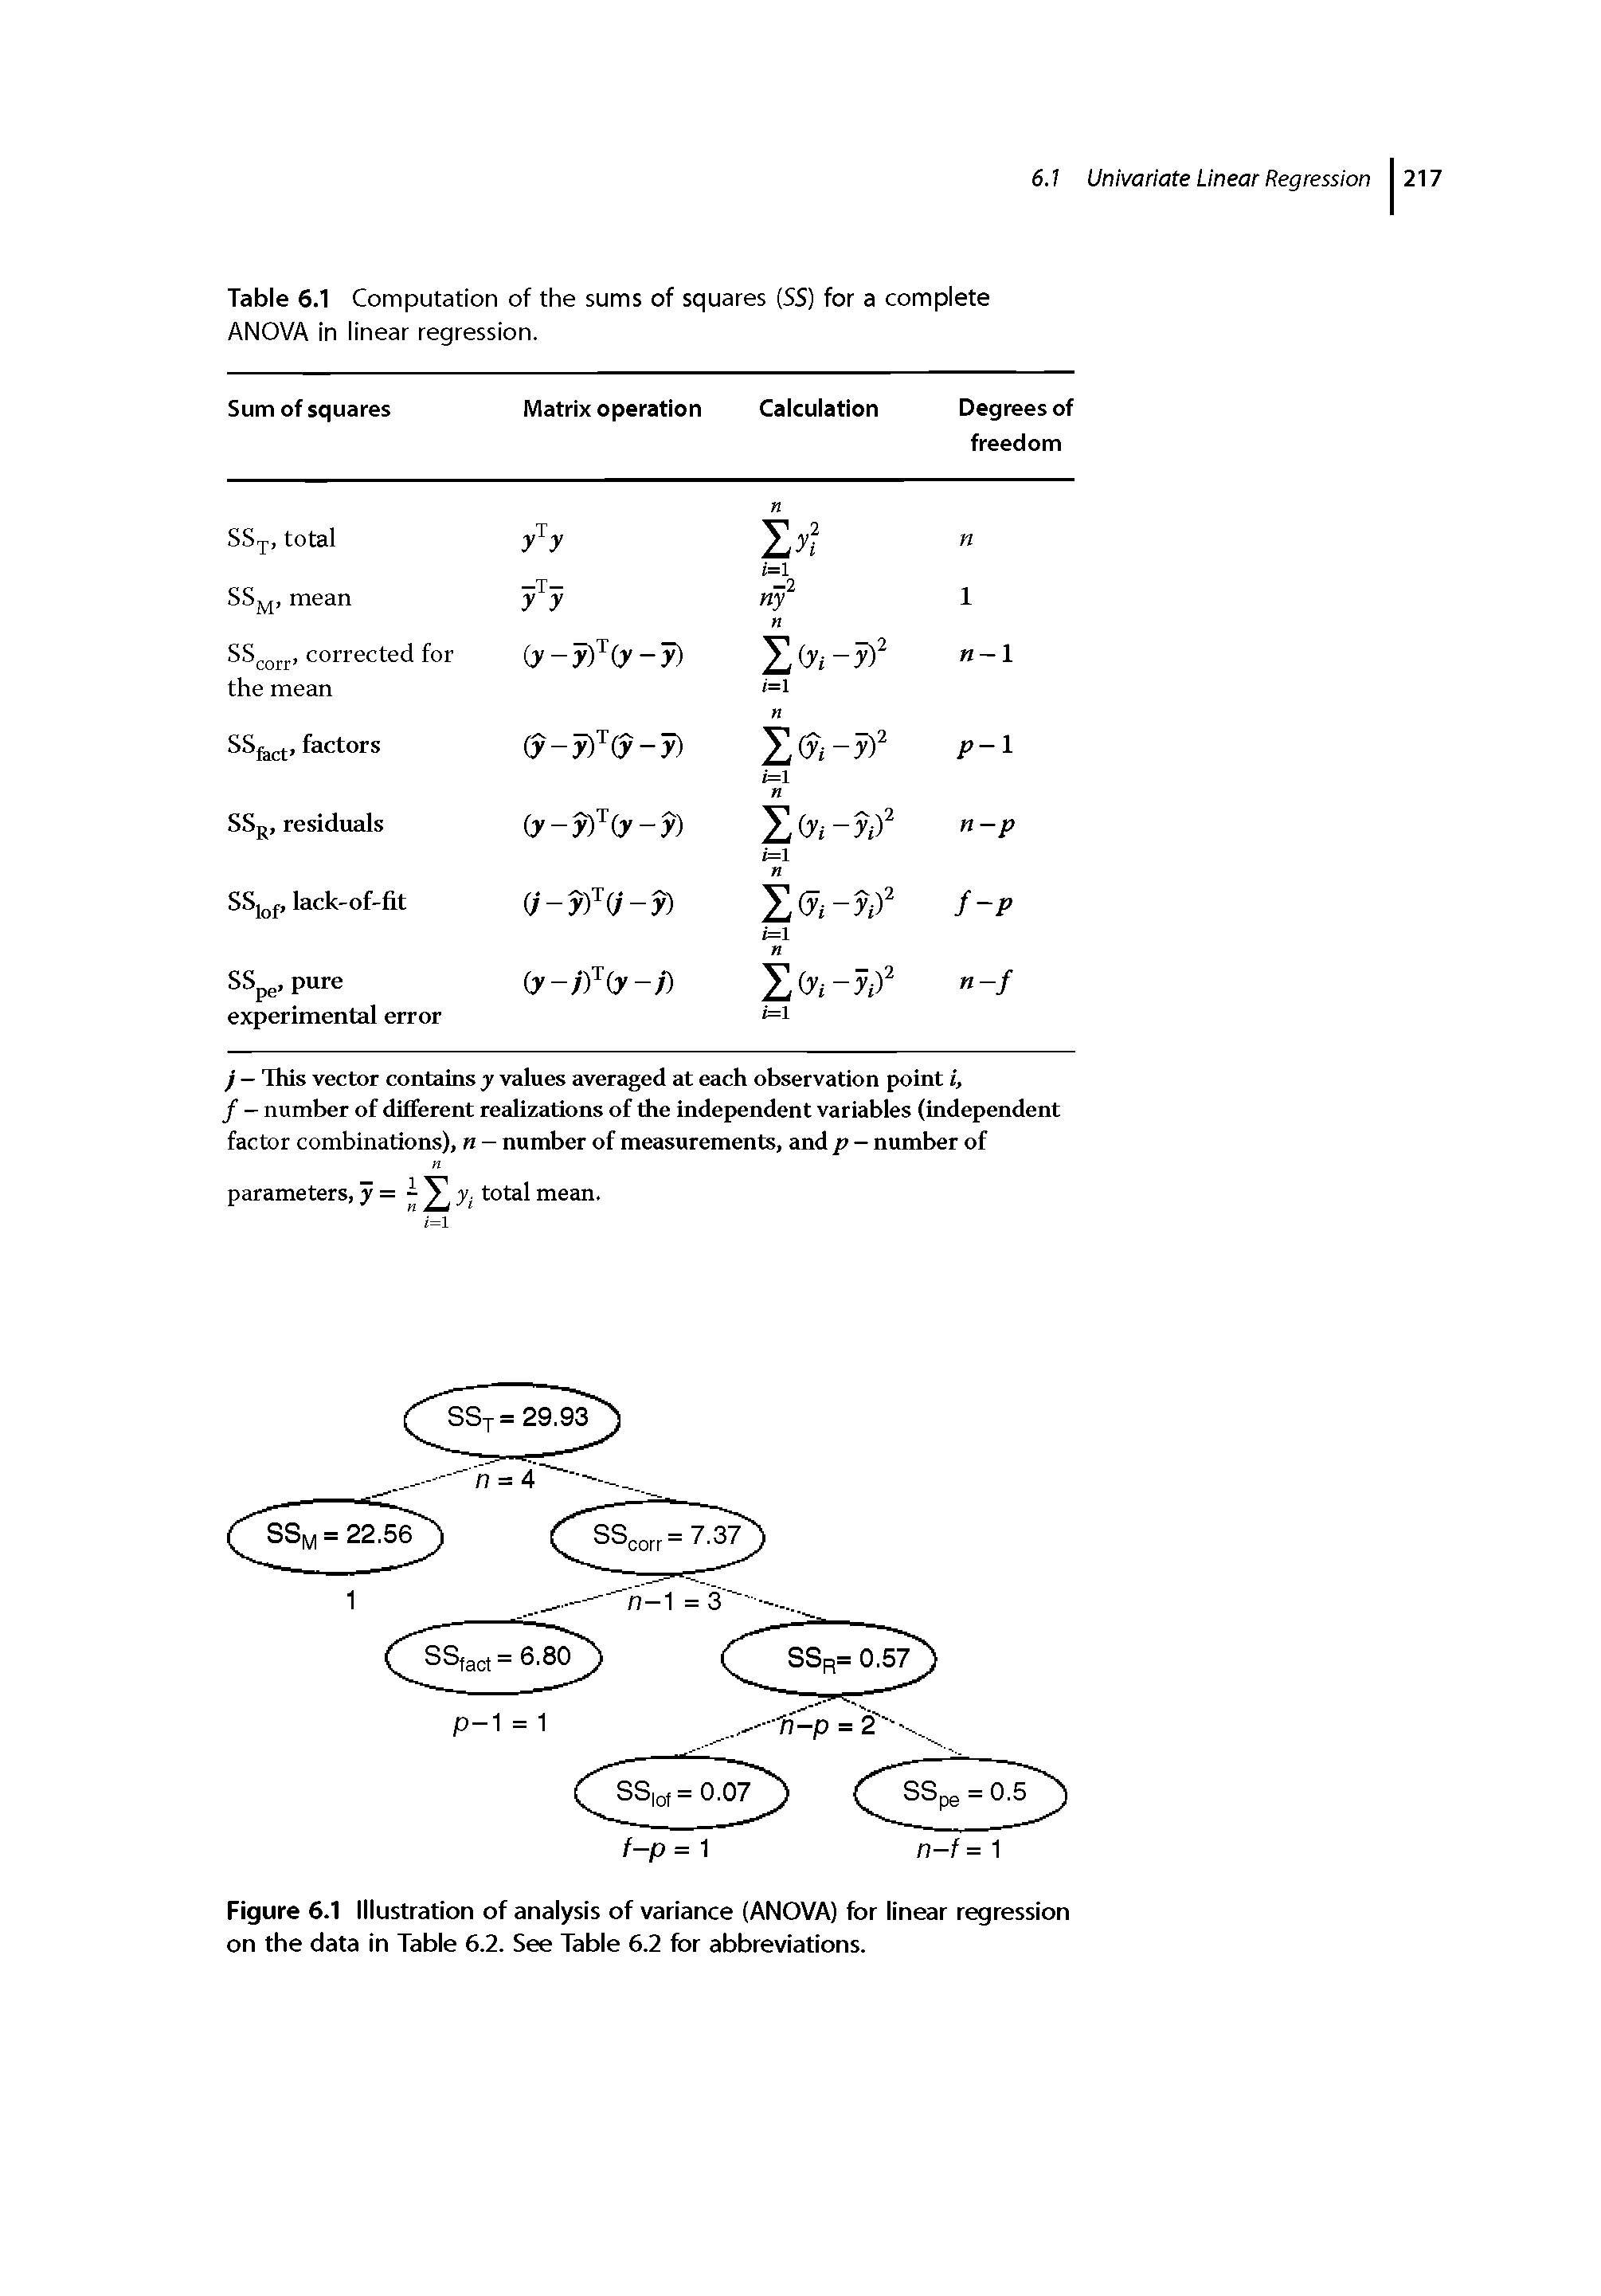 Figure 6.1 Illustration of analysis of variance (ANOVA) for linear regression on the data in Table 6.2. See Table 6.2 for abbreviations.